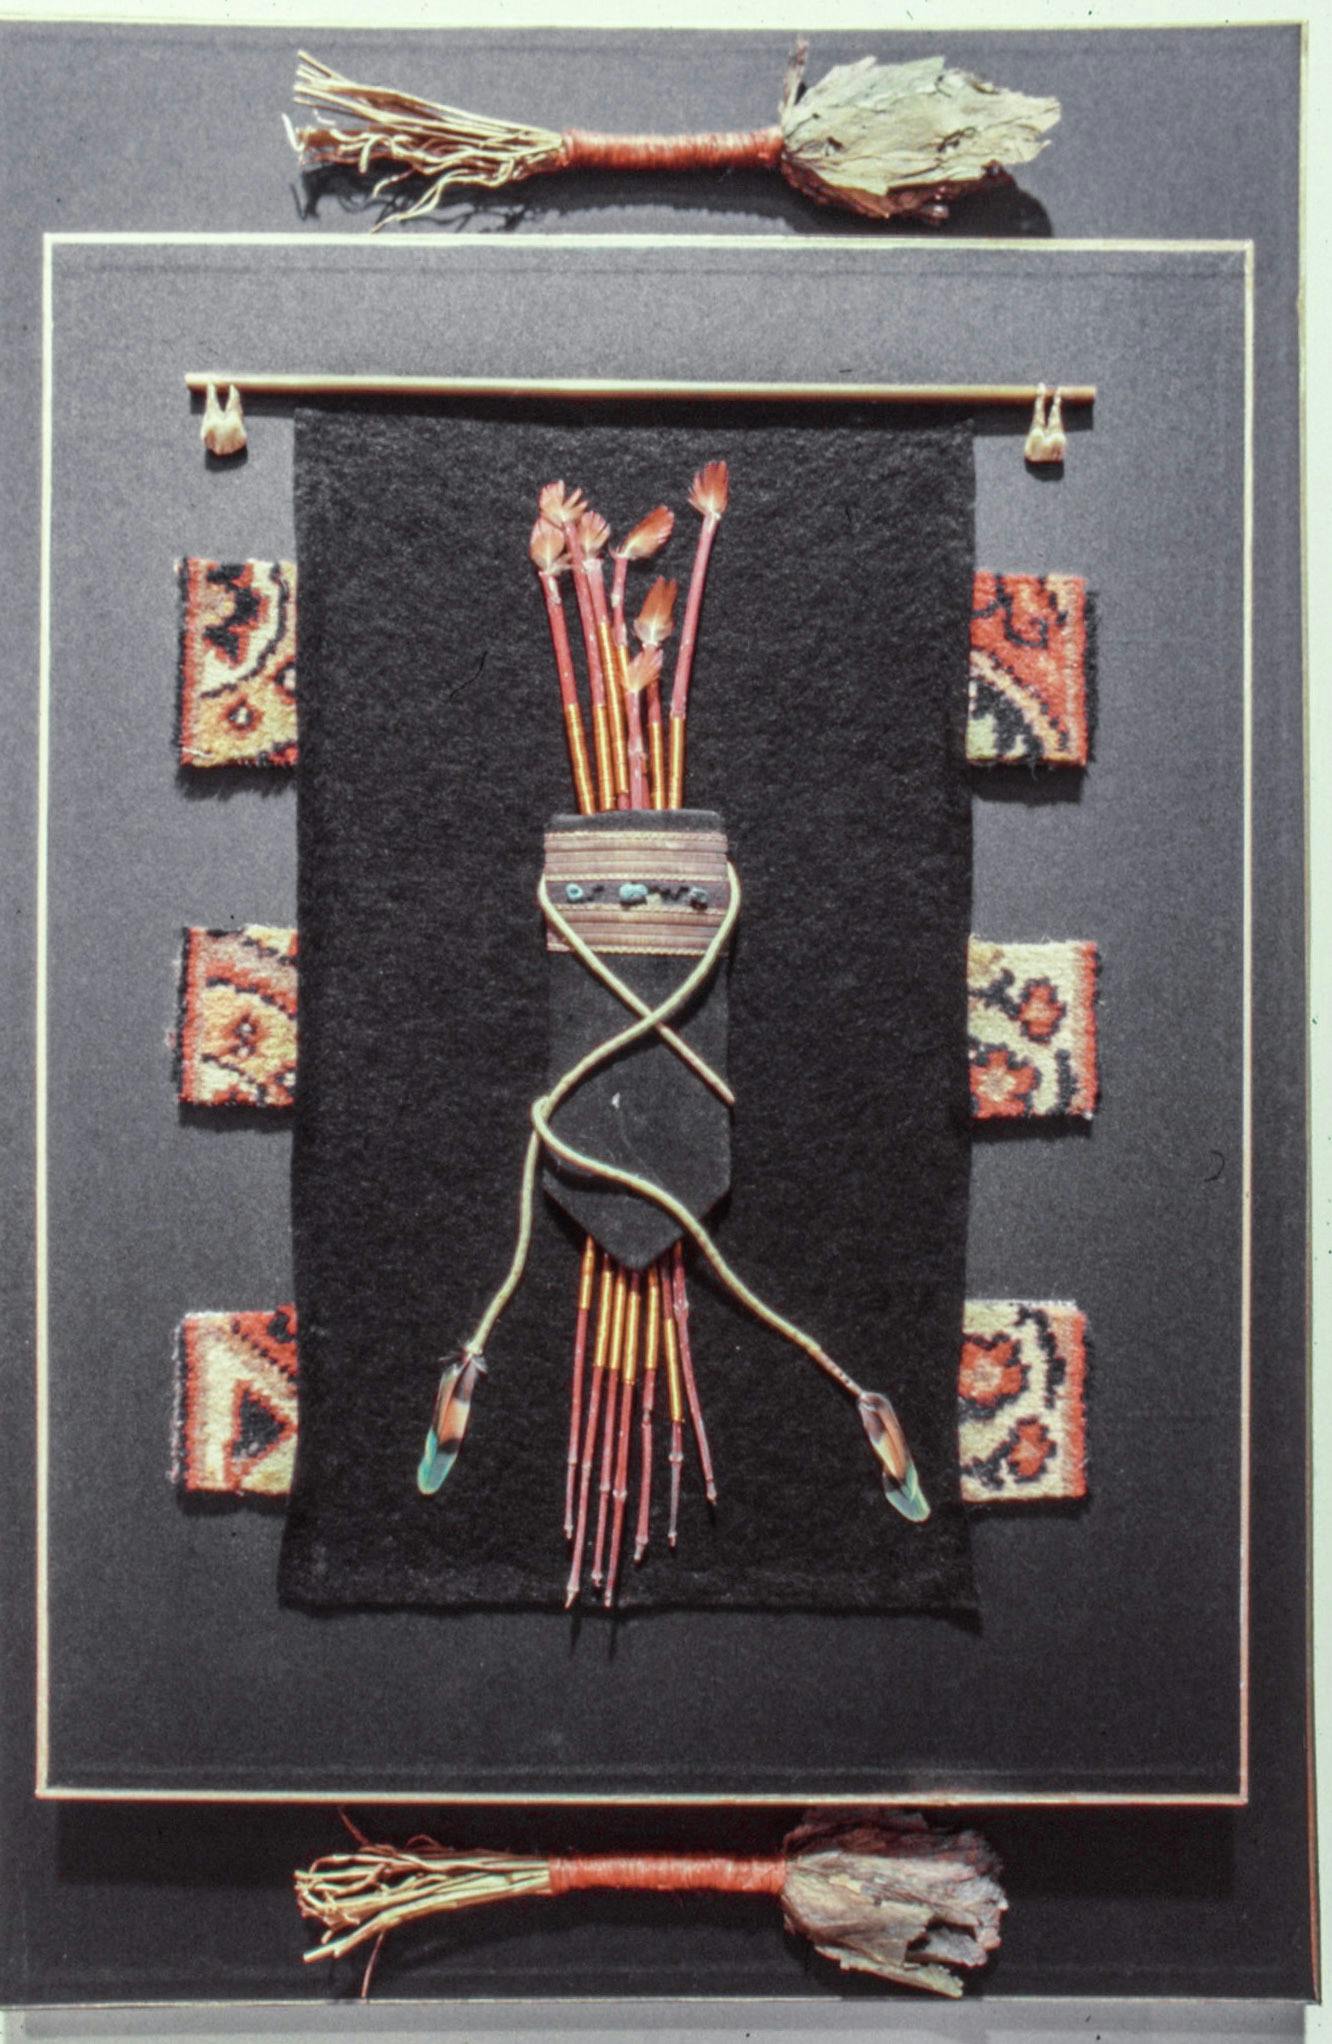 A closeup of an artwork on a wall. The work is made of several pieces mounted on black paper, including bundled dry herbs, small weavings, twined feathers and beaded leather. 